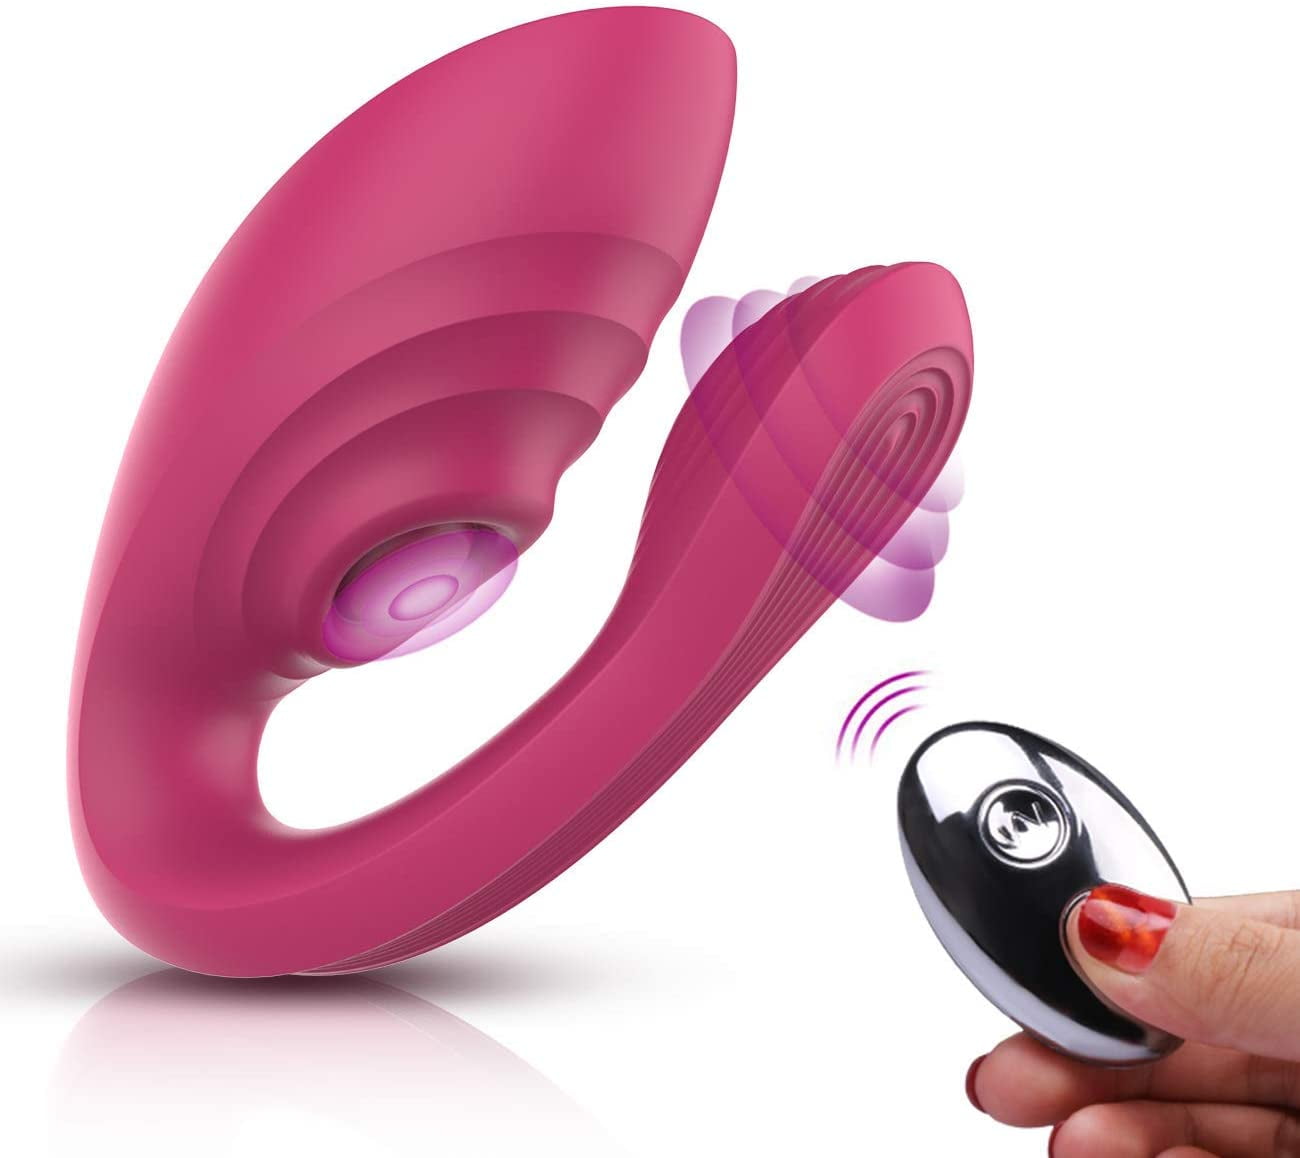 Powerful Couple Vibrators for Women Men, Double Motors Adult Sexual Toys Sex for Men Female Women Her Pleasure with Remote Control Wireless Clitoral Stimulation